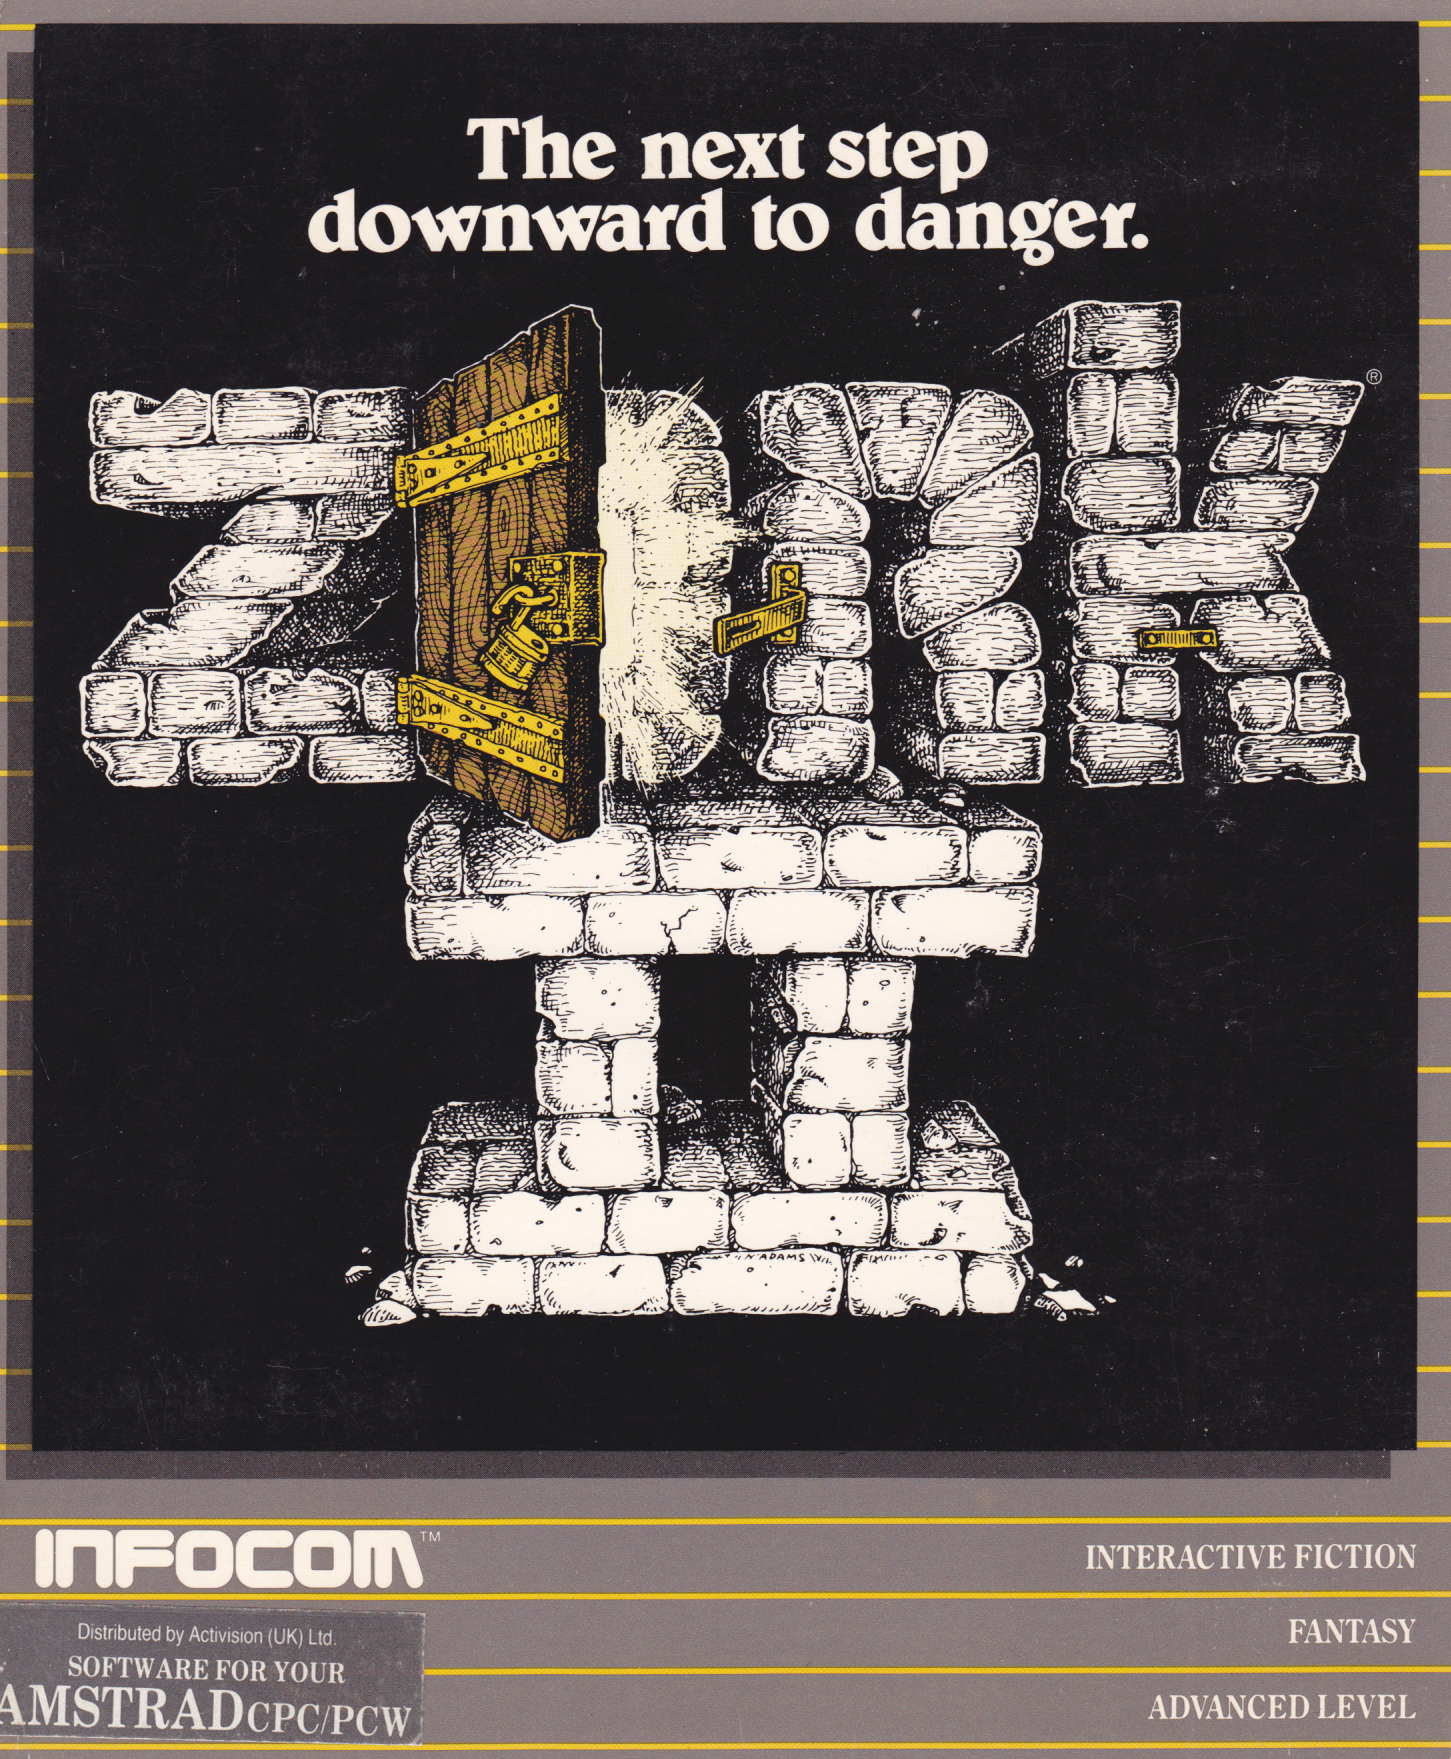 screenshot of the Amstrad CPC game Zork II: the wizard of frobozz by GameBase CPC